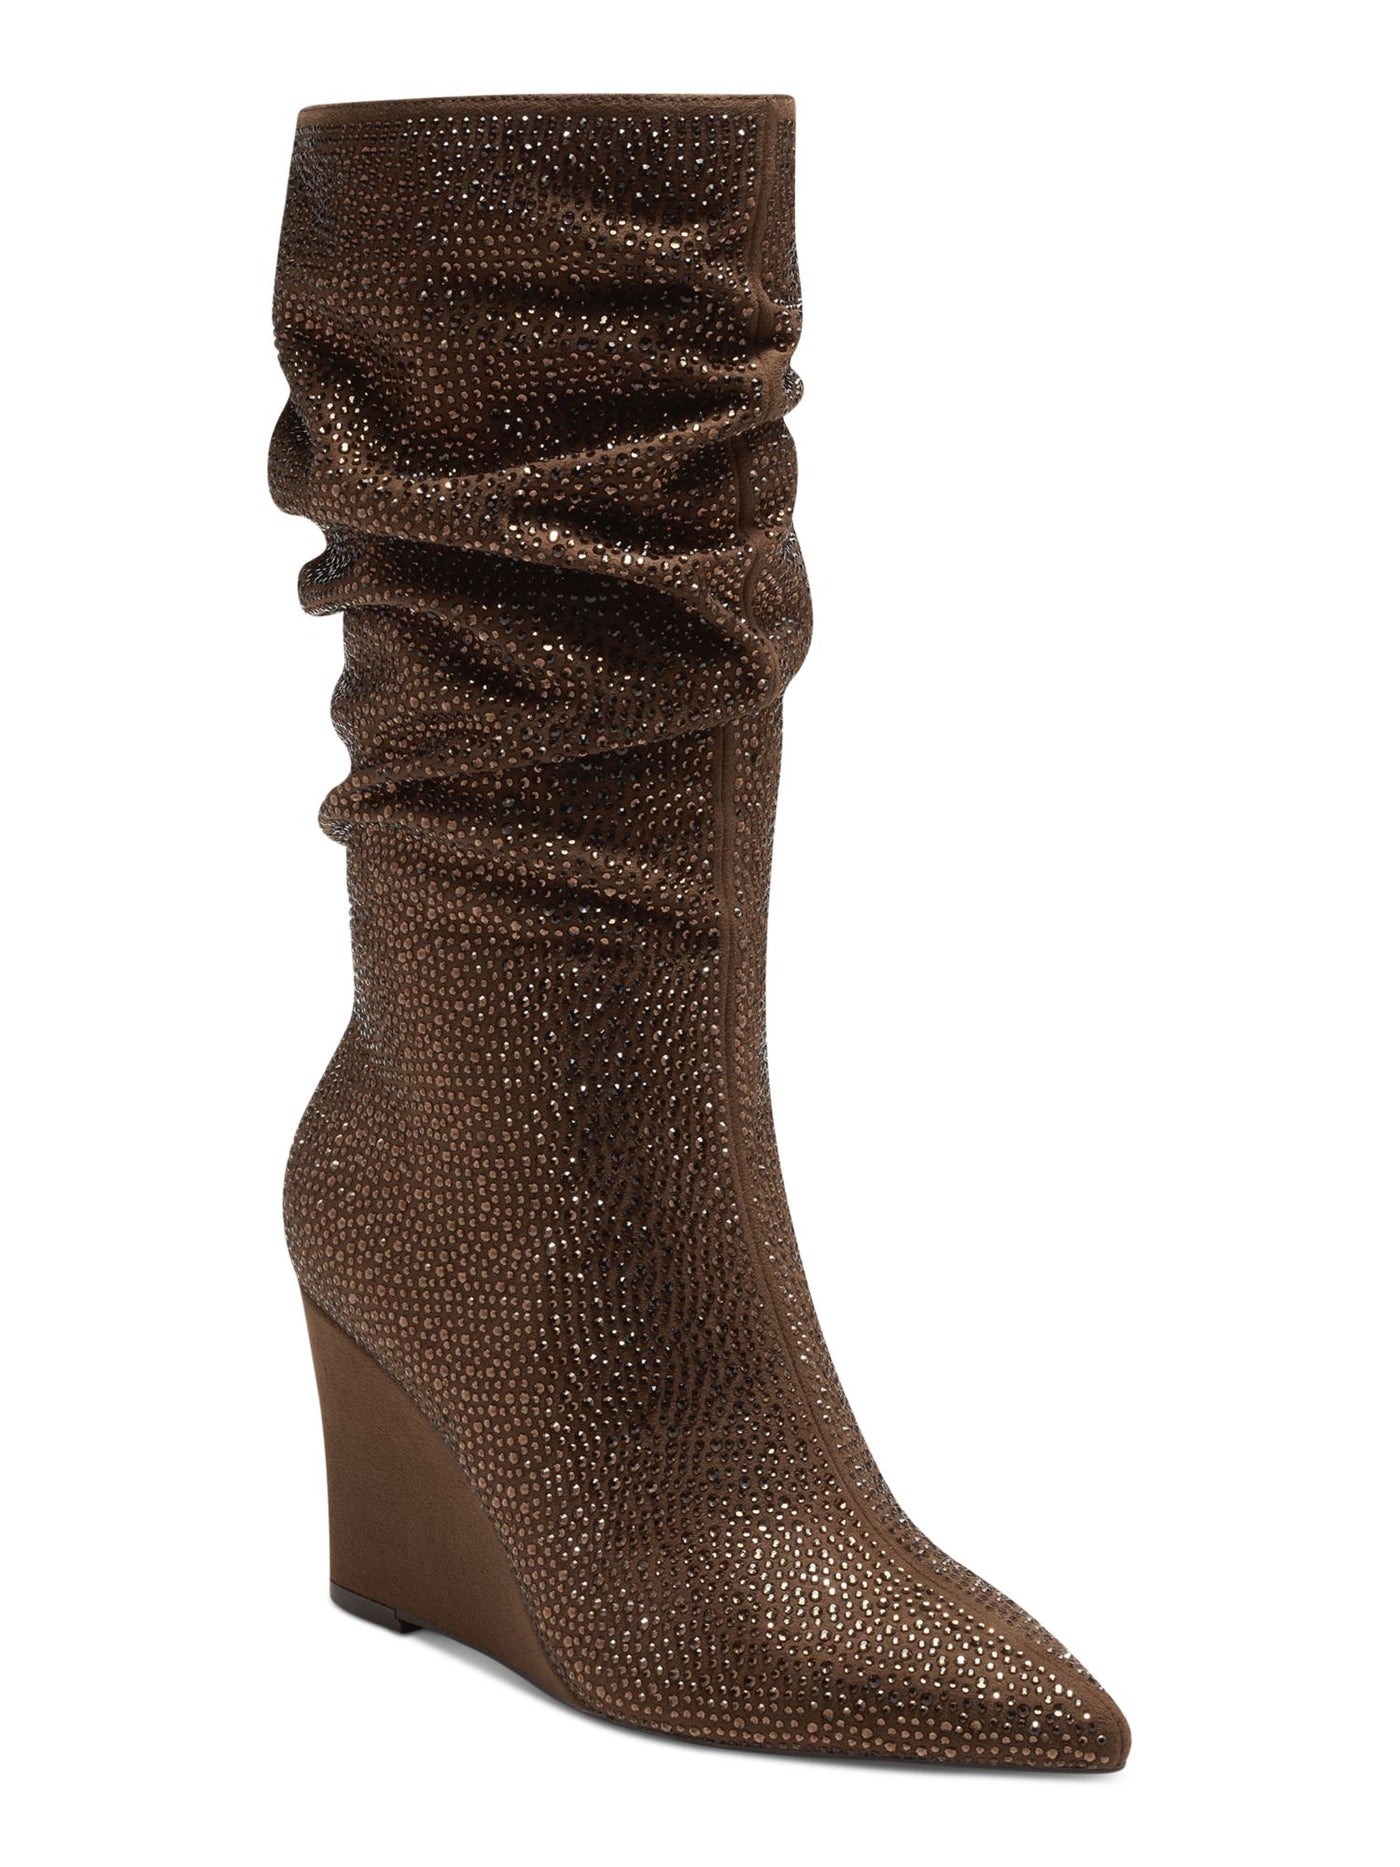 INC Womens Brown Cushioned Rhinestone Florelle Pointed Toe Wedge Zip-Up Dress Slouch Boot 6 M